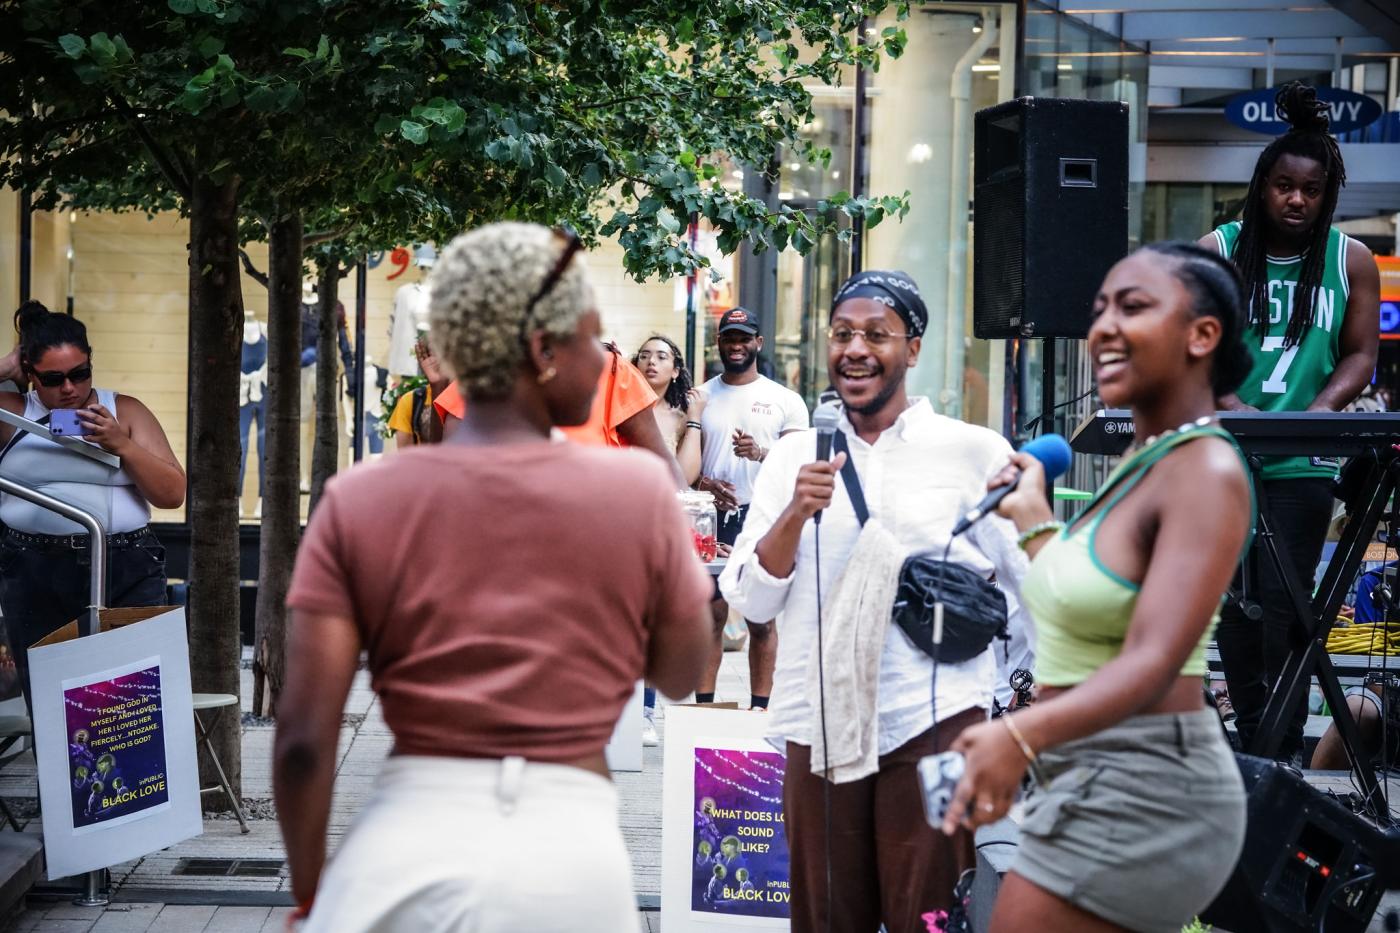 On a city street, three folks sing into microphones and look at one another.